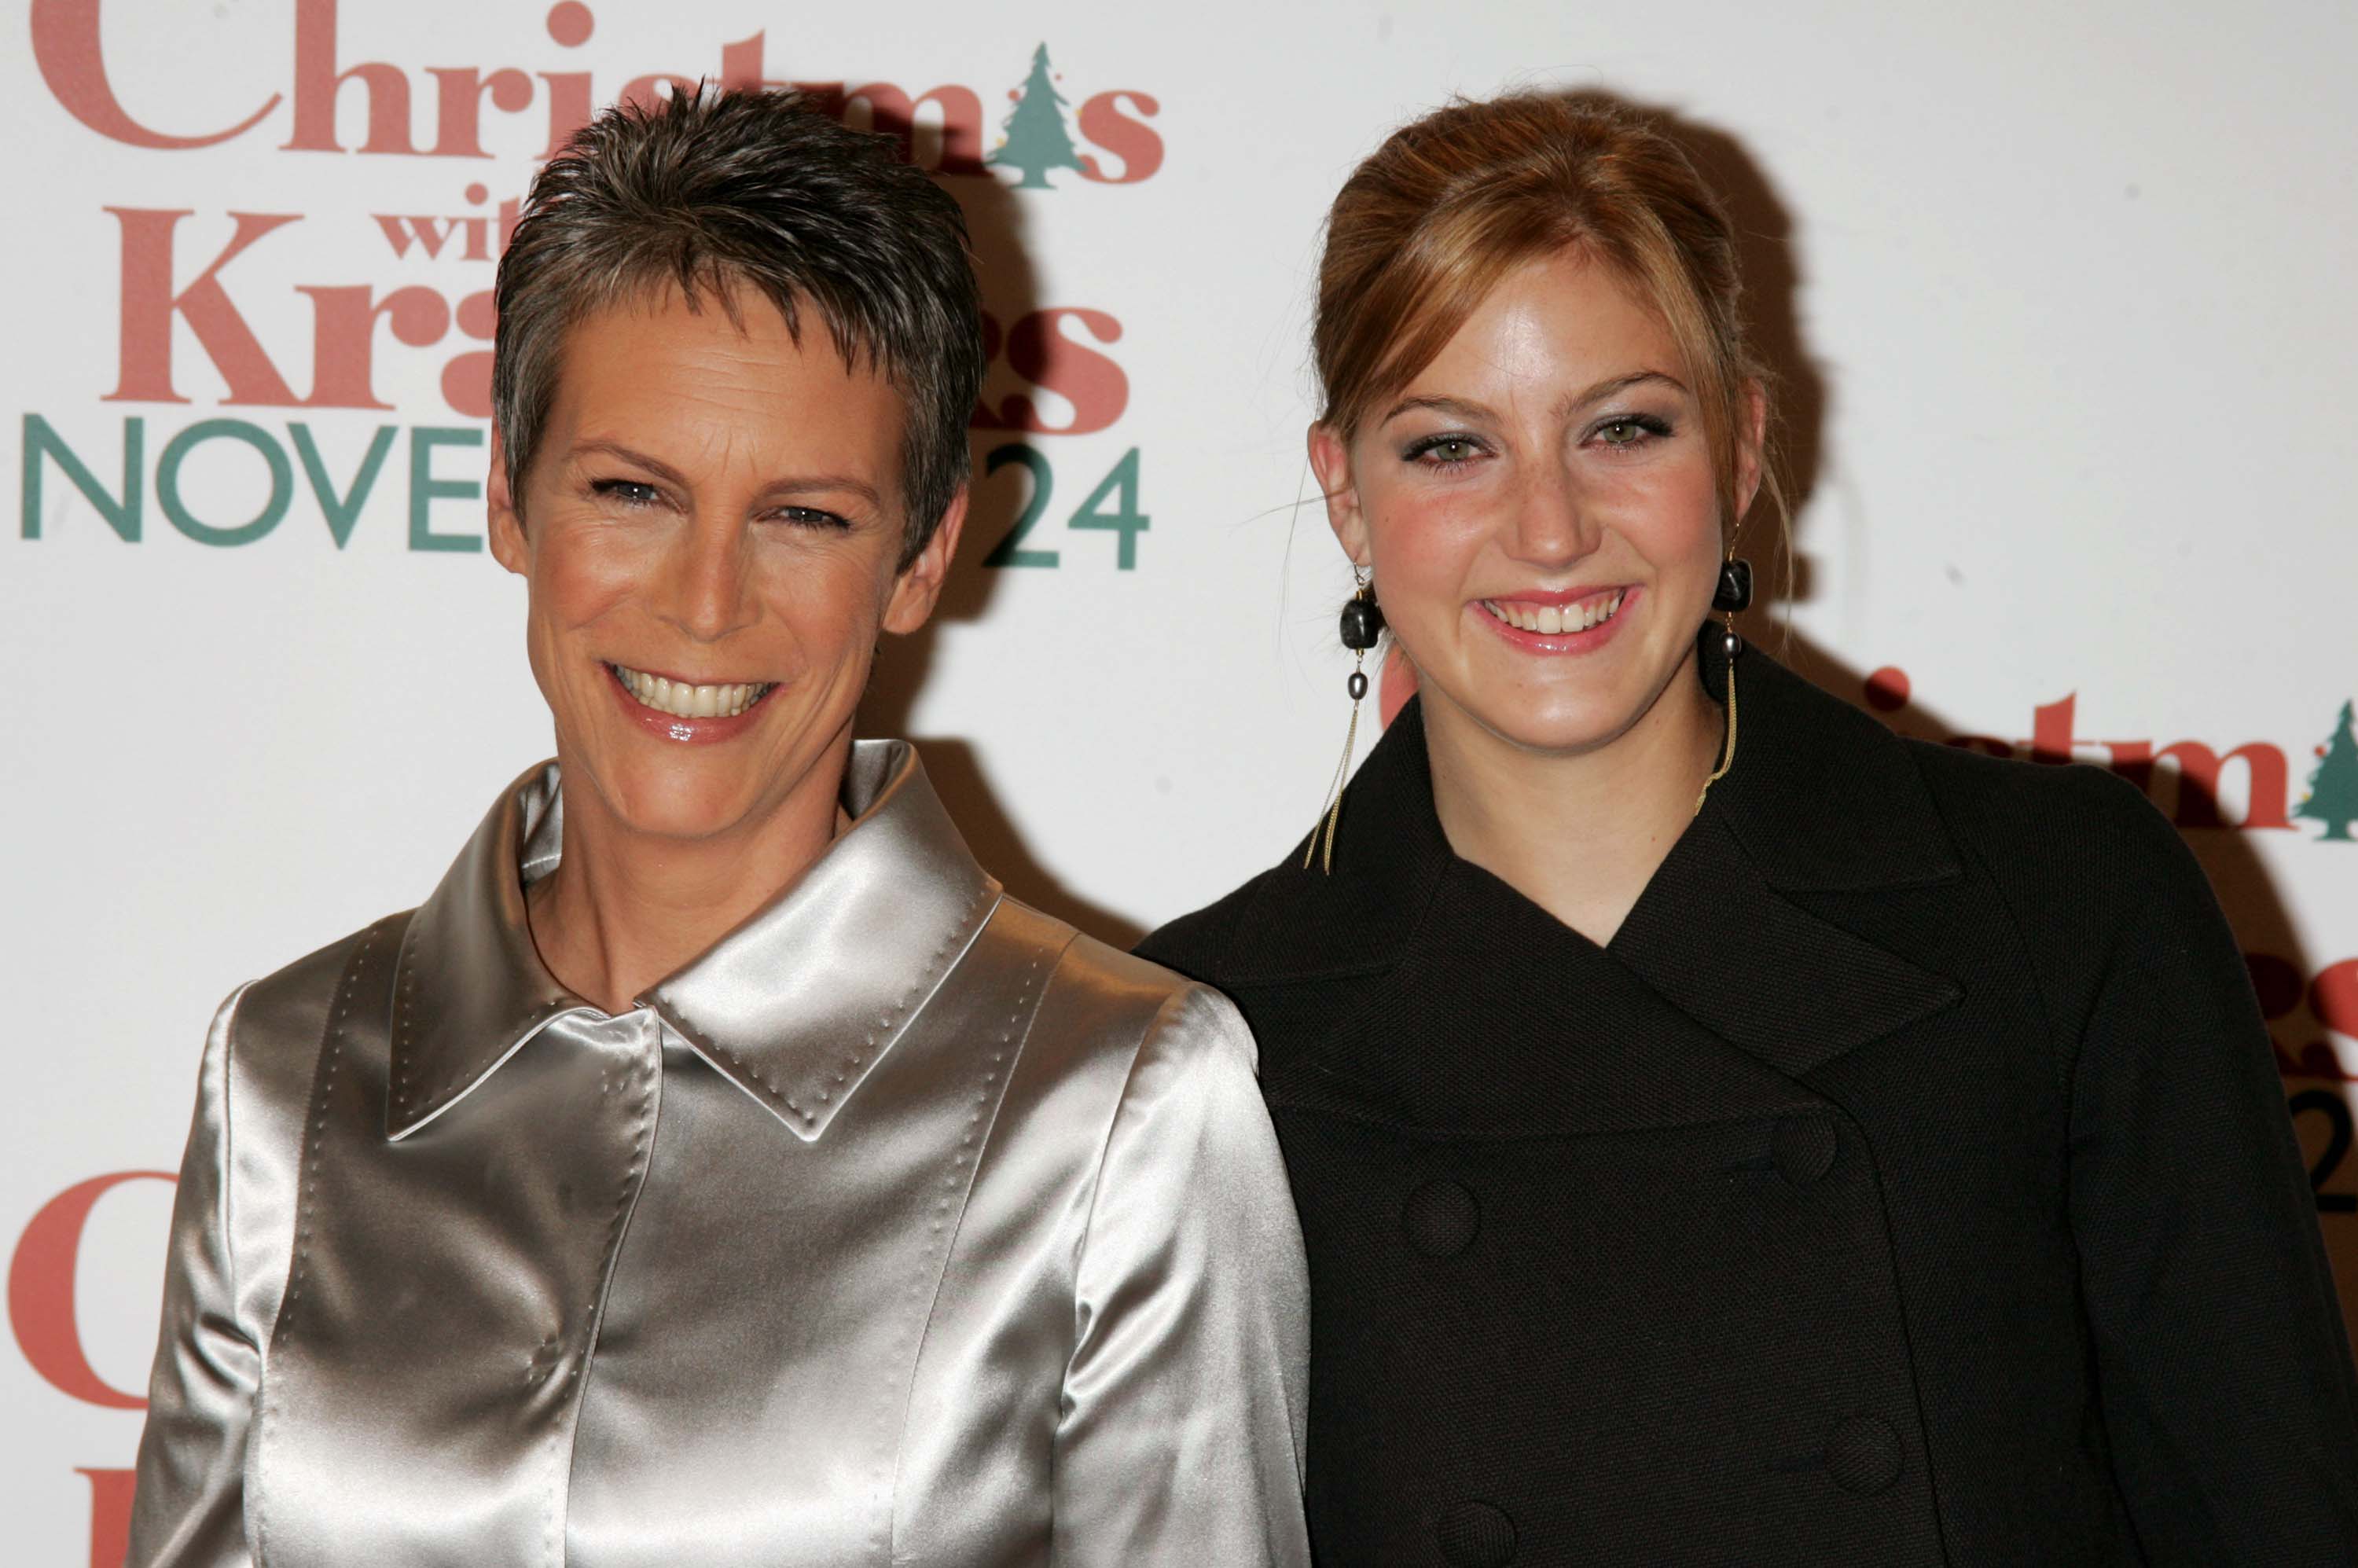 Jamie Lee Curtis and daughter during Christmas with The Kranks New York City Premiere - Outside Arrivals at Radio City Music Hall in New York City, New York, United States. | Source: Getty Images